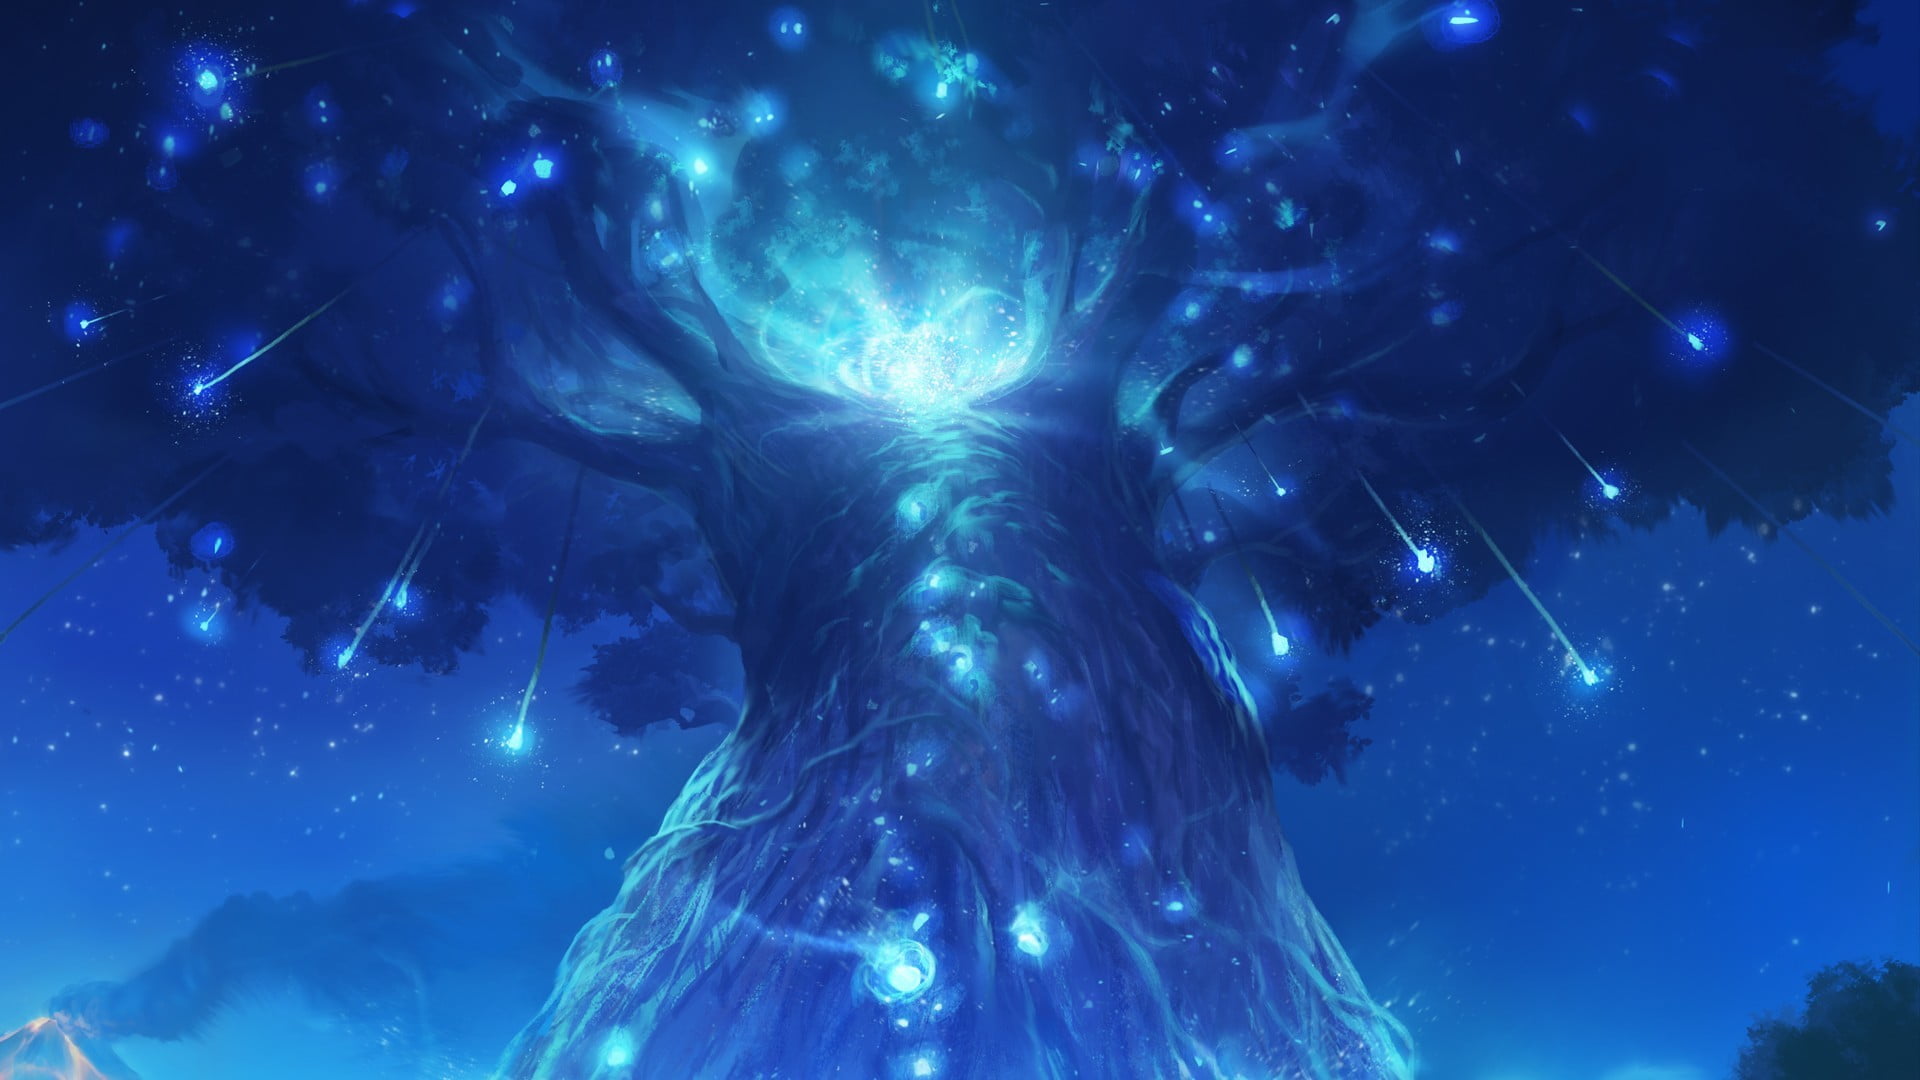 Ori and the Blind Forest story summary(major spoilers)